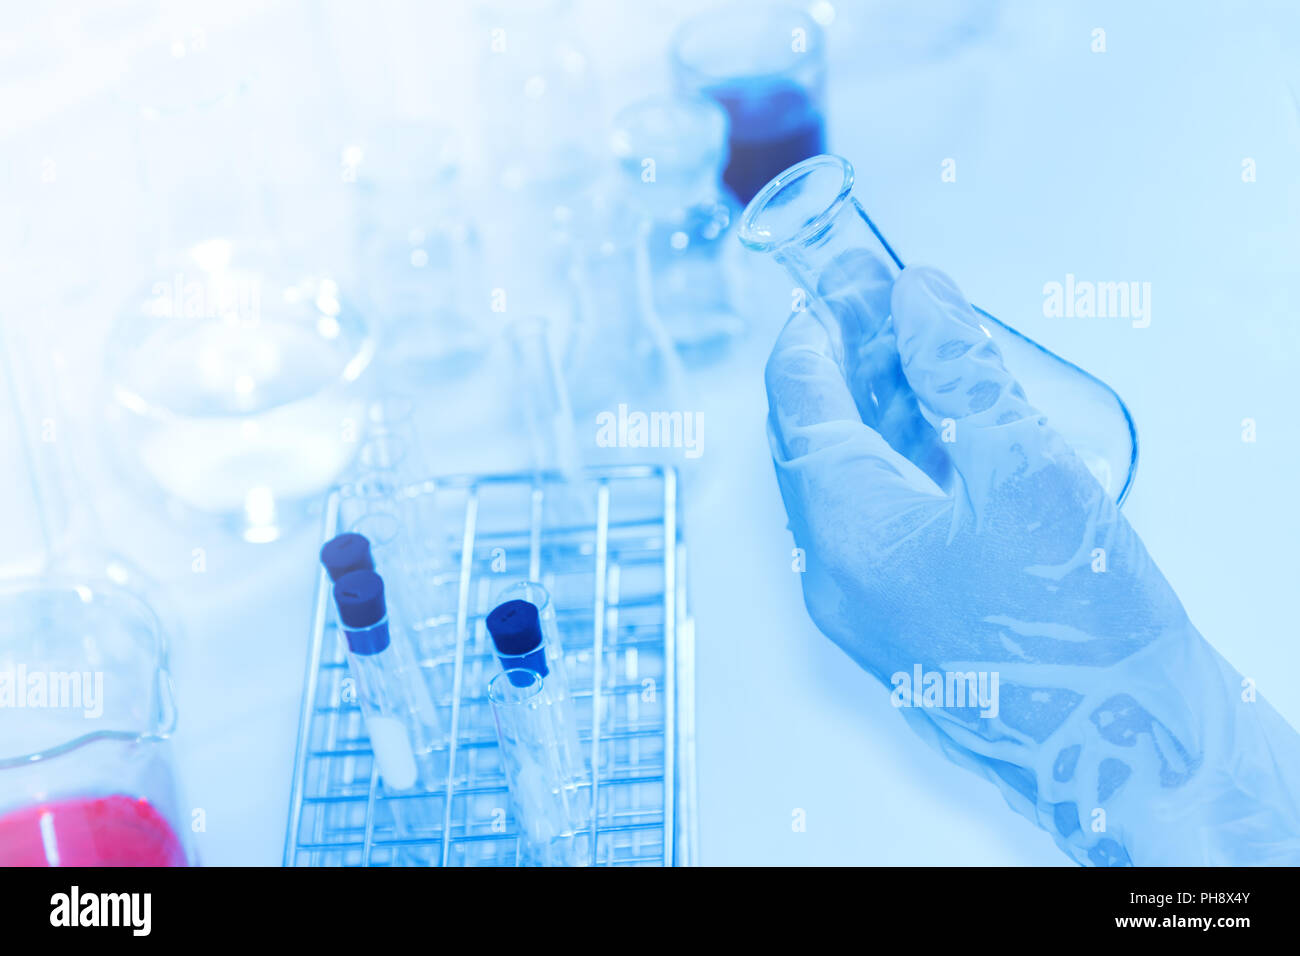 Laboratory glassware containing chemical liquid, science research. Stock Photo